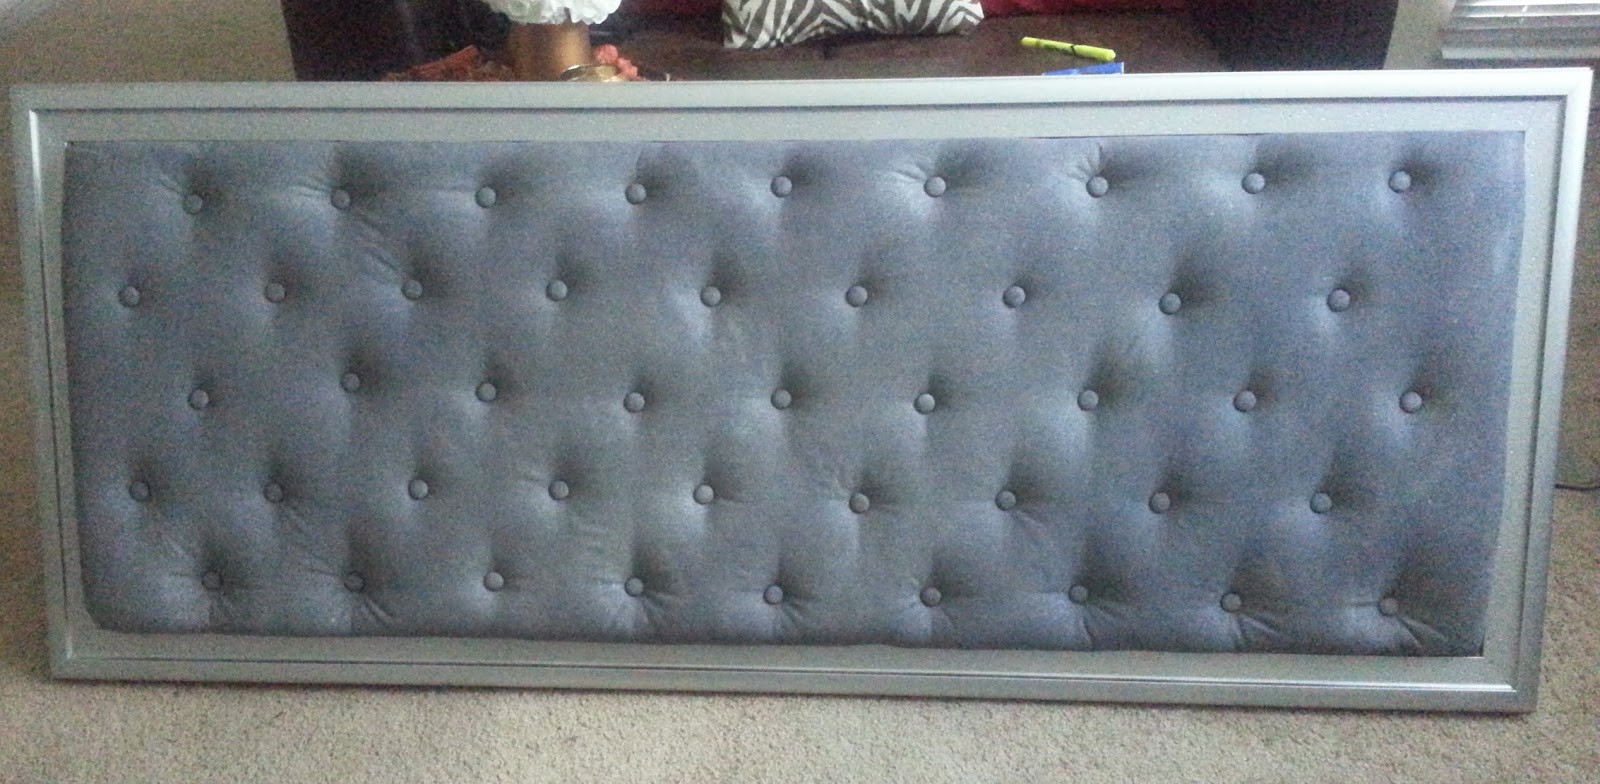 pay but to  didn't diy headboard a tufted over I  it wanted headboard $200 for want